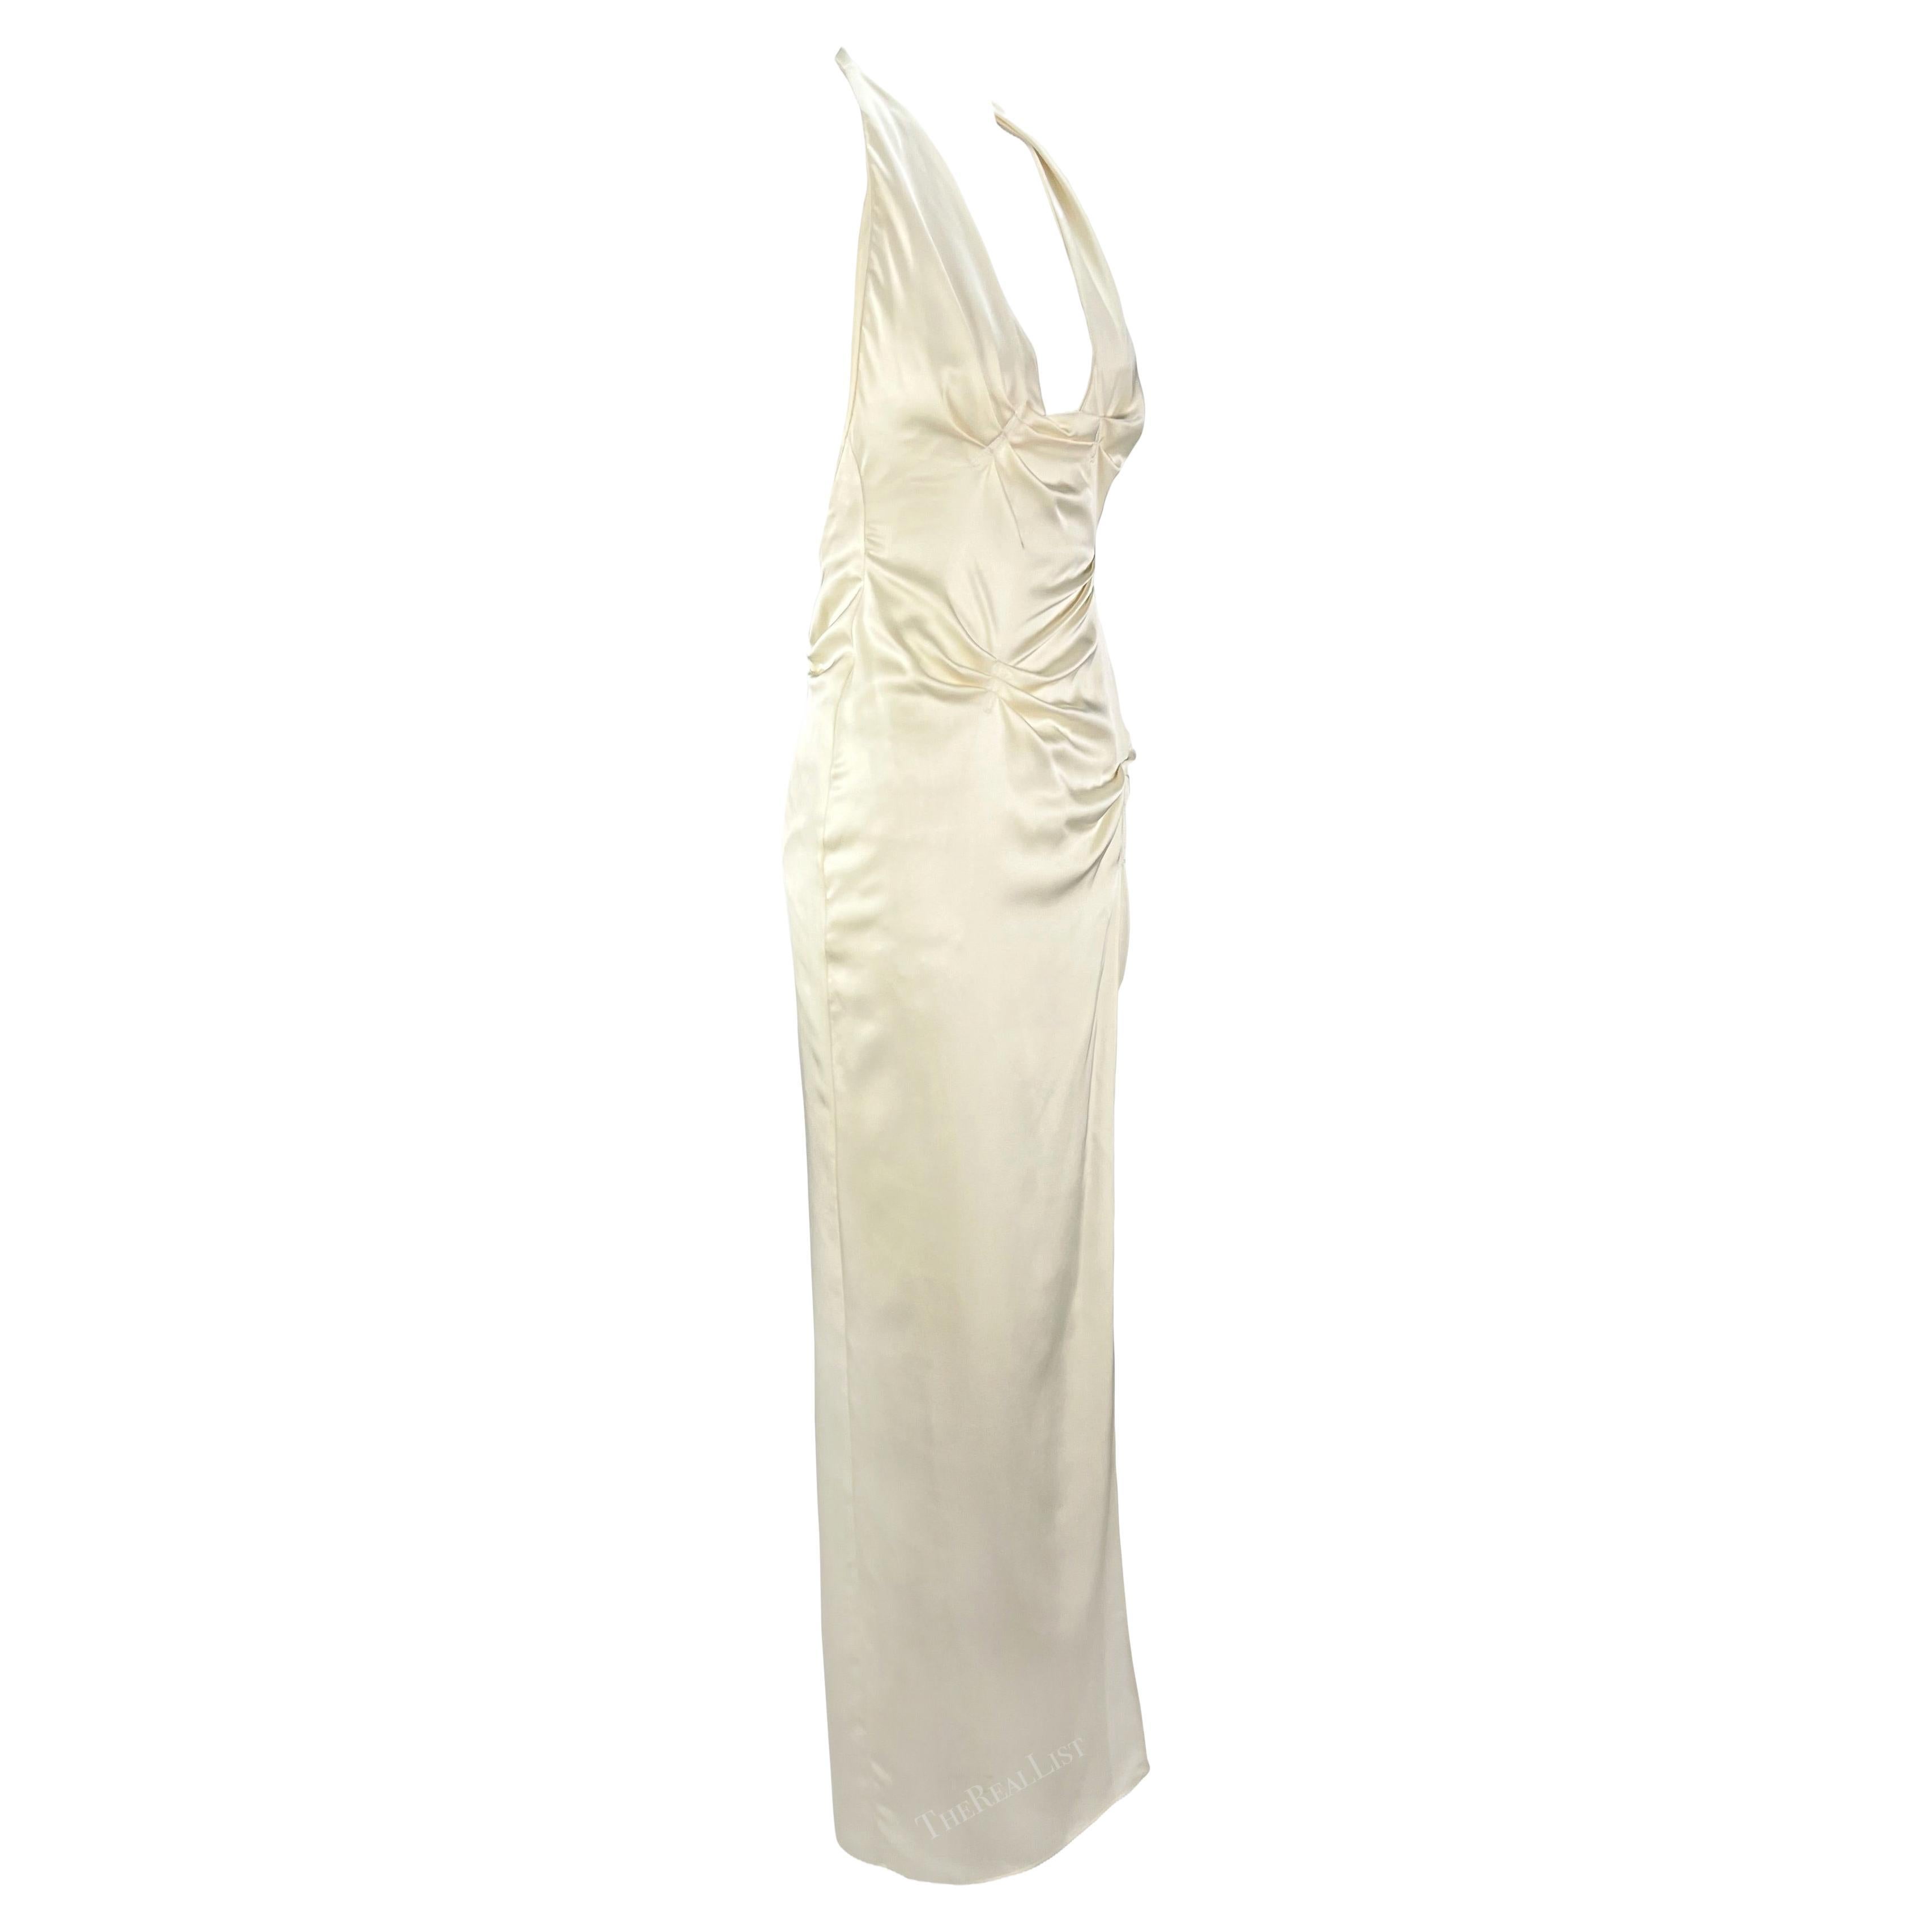 S/S 1999 Gianni Versace by Donatella Ruched Off-White High-Slit Backless Gown 6